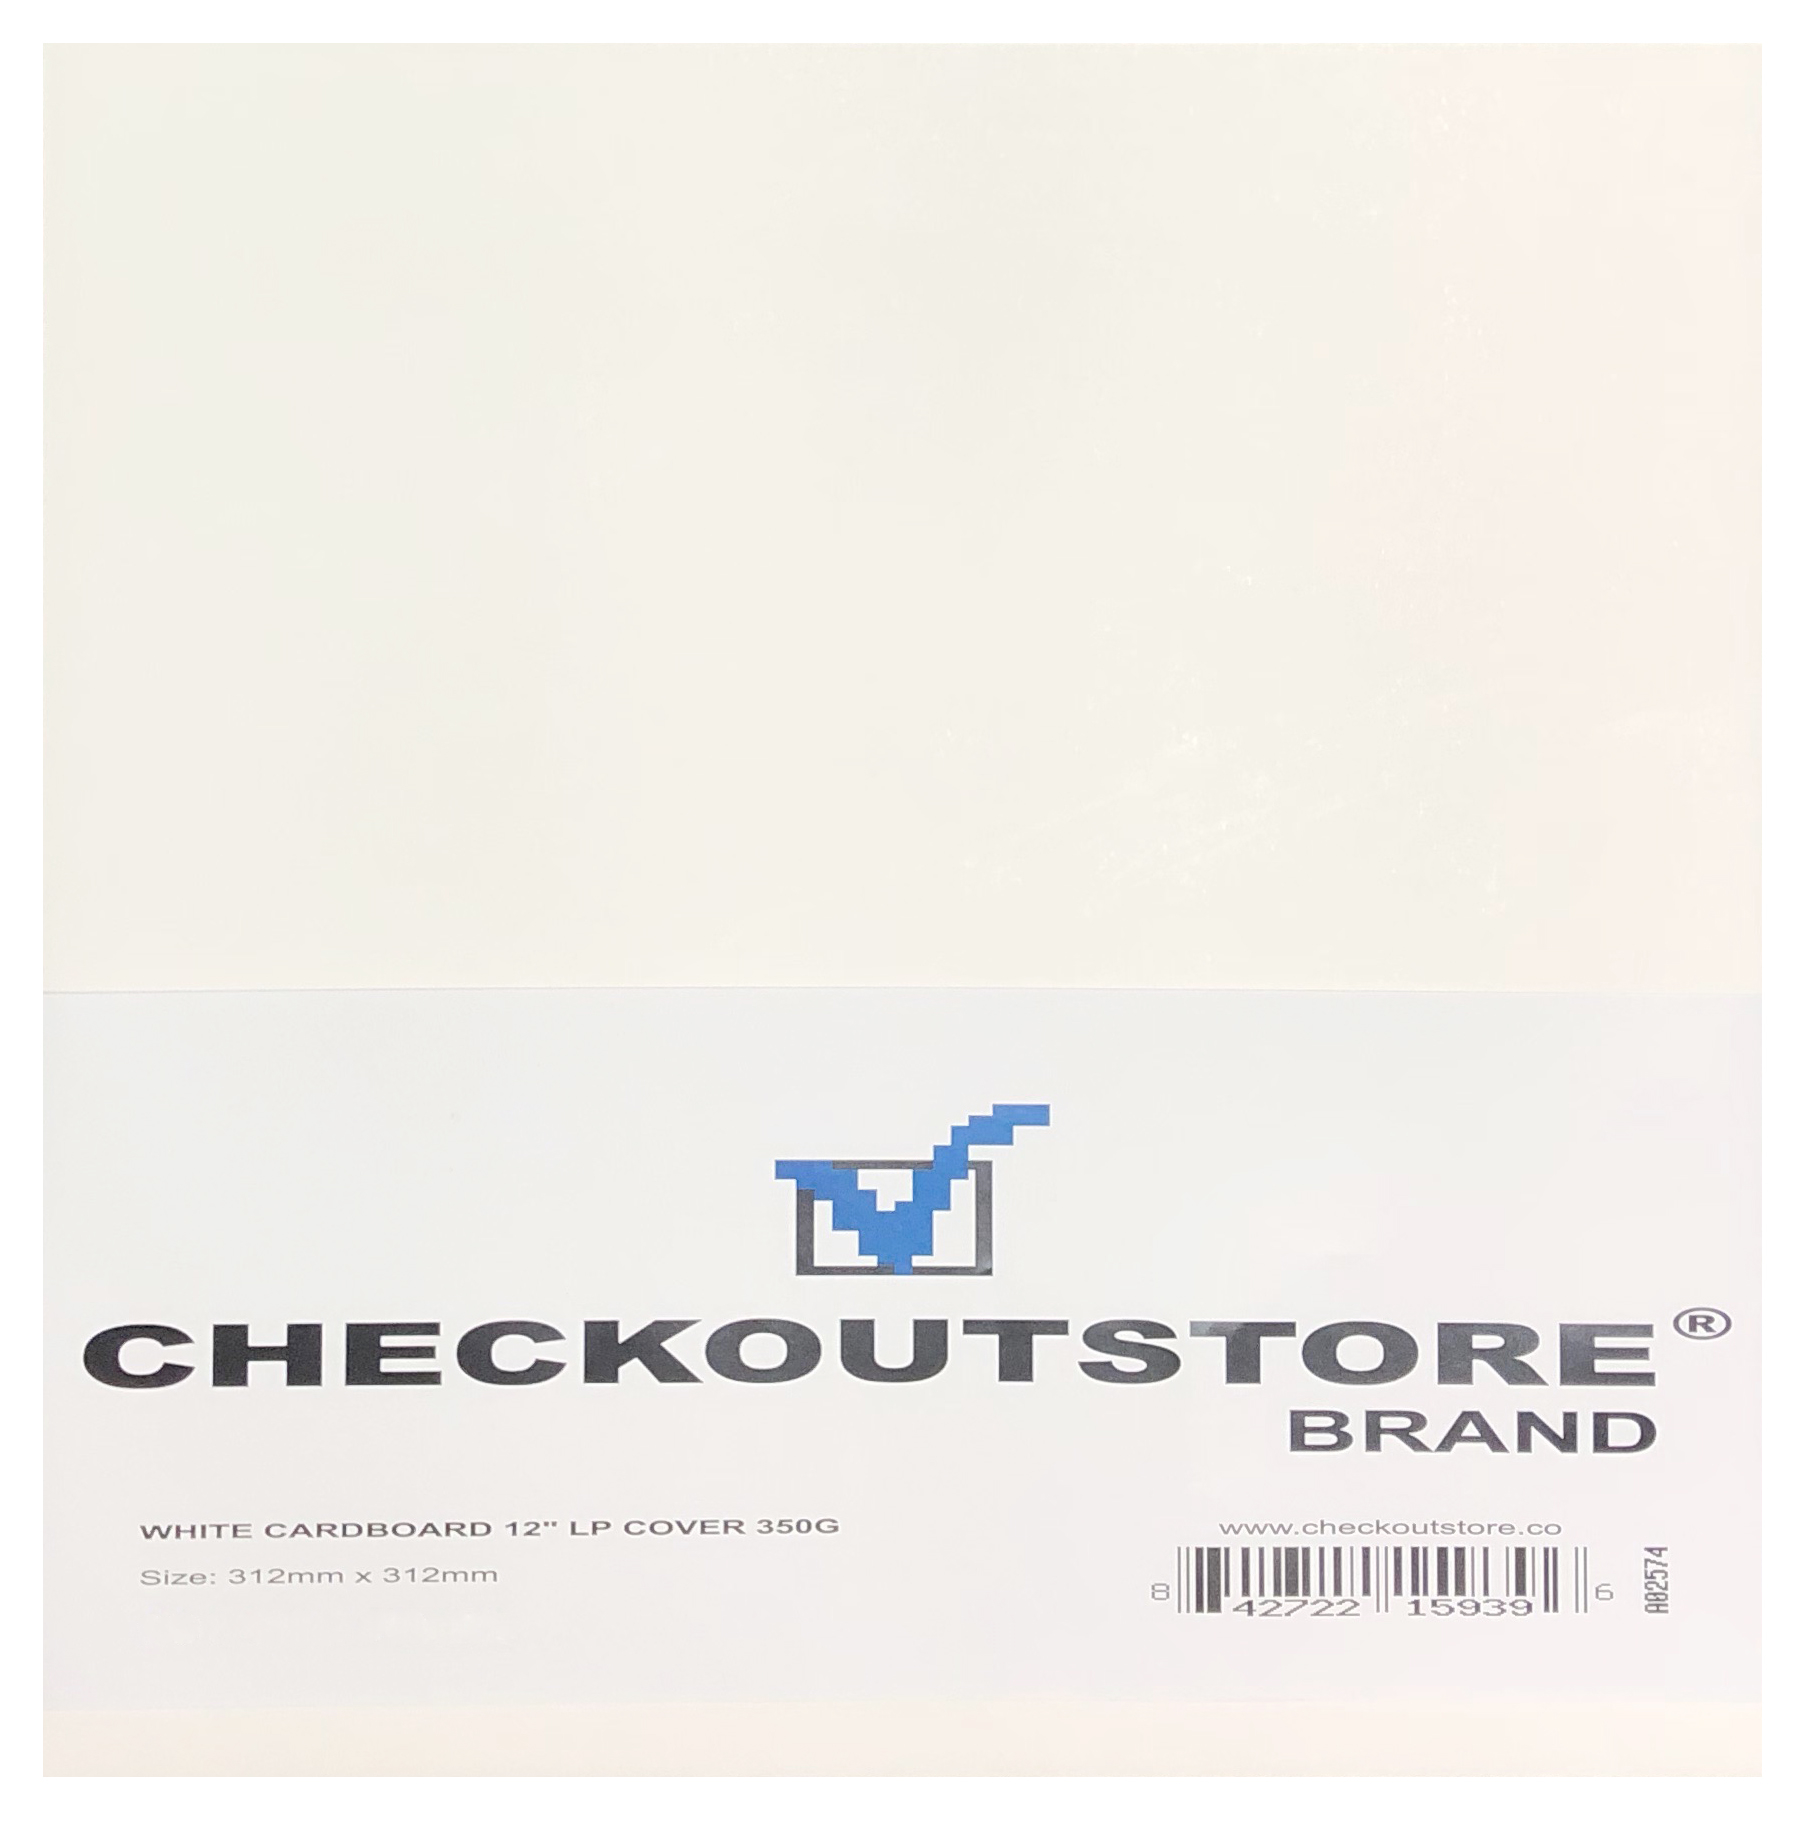 Image of ID 1214260865 100 CheckOutStore Cardboard Jackets Album Cover for 12" LP Vinyl 33 RPM Records